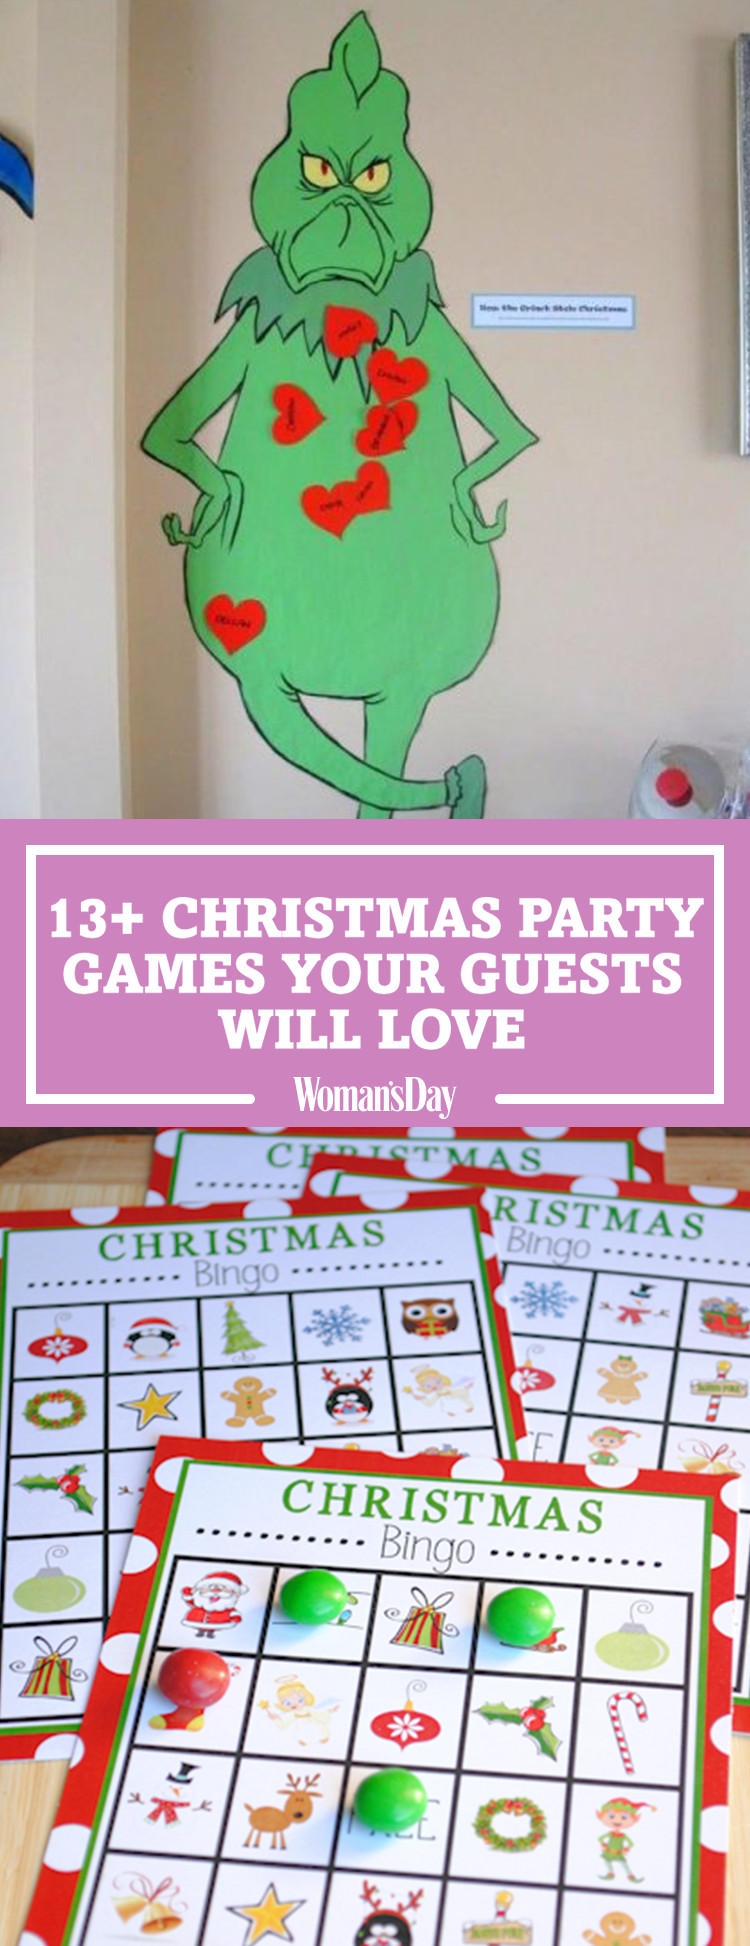 Fun Office Christmas Party Ideas
 17 Fun Christmas Party Games for Kids DIY Holiday Party